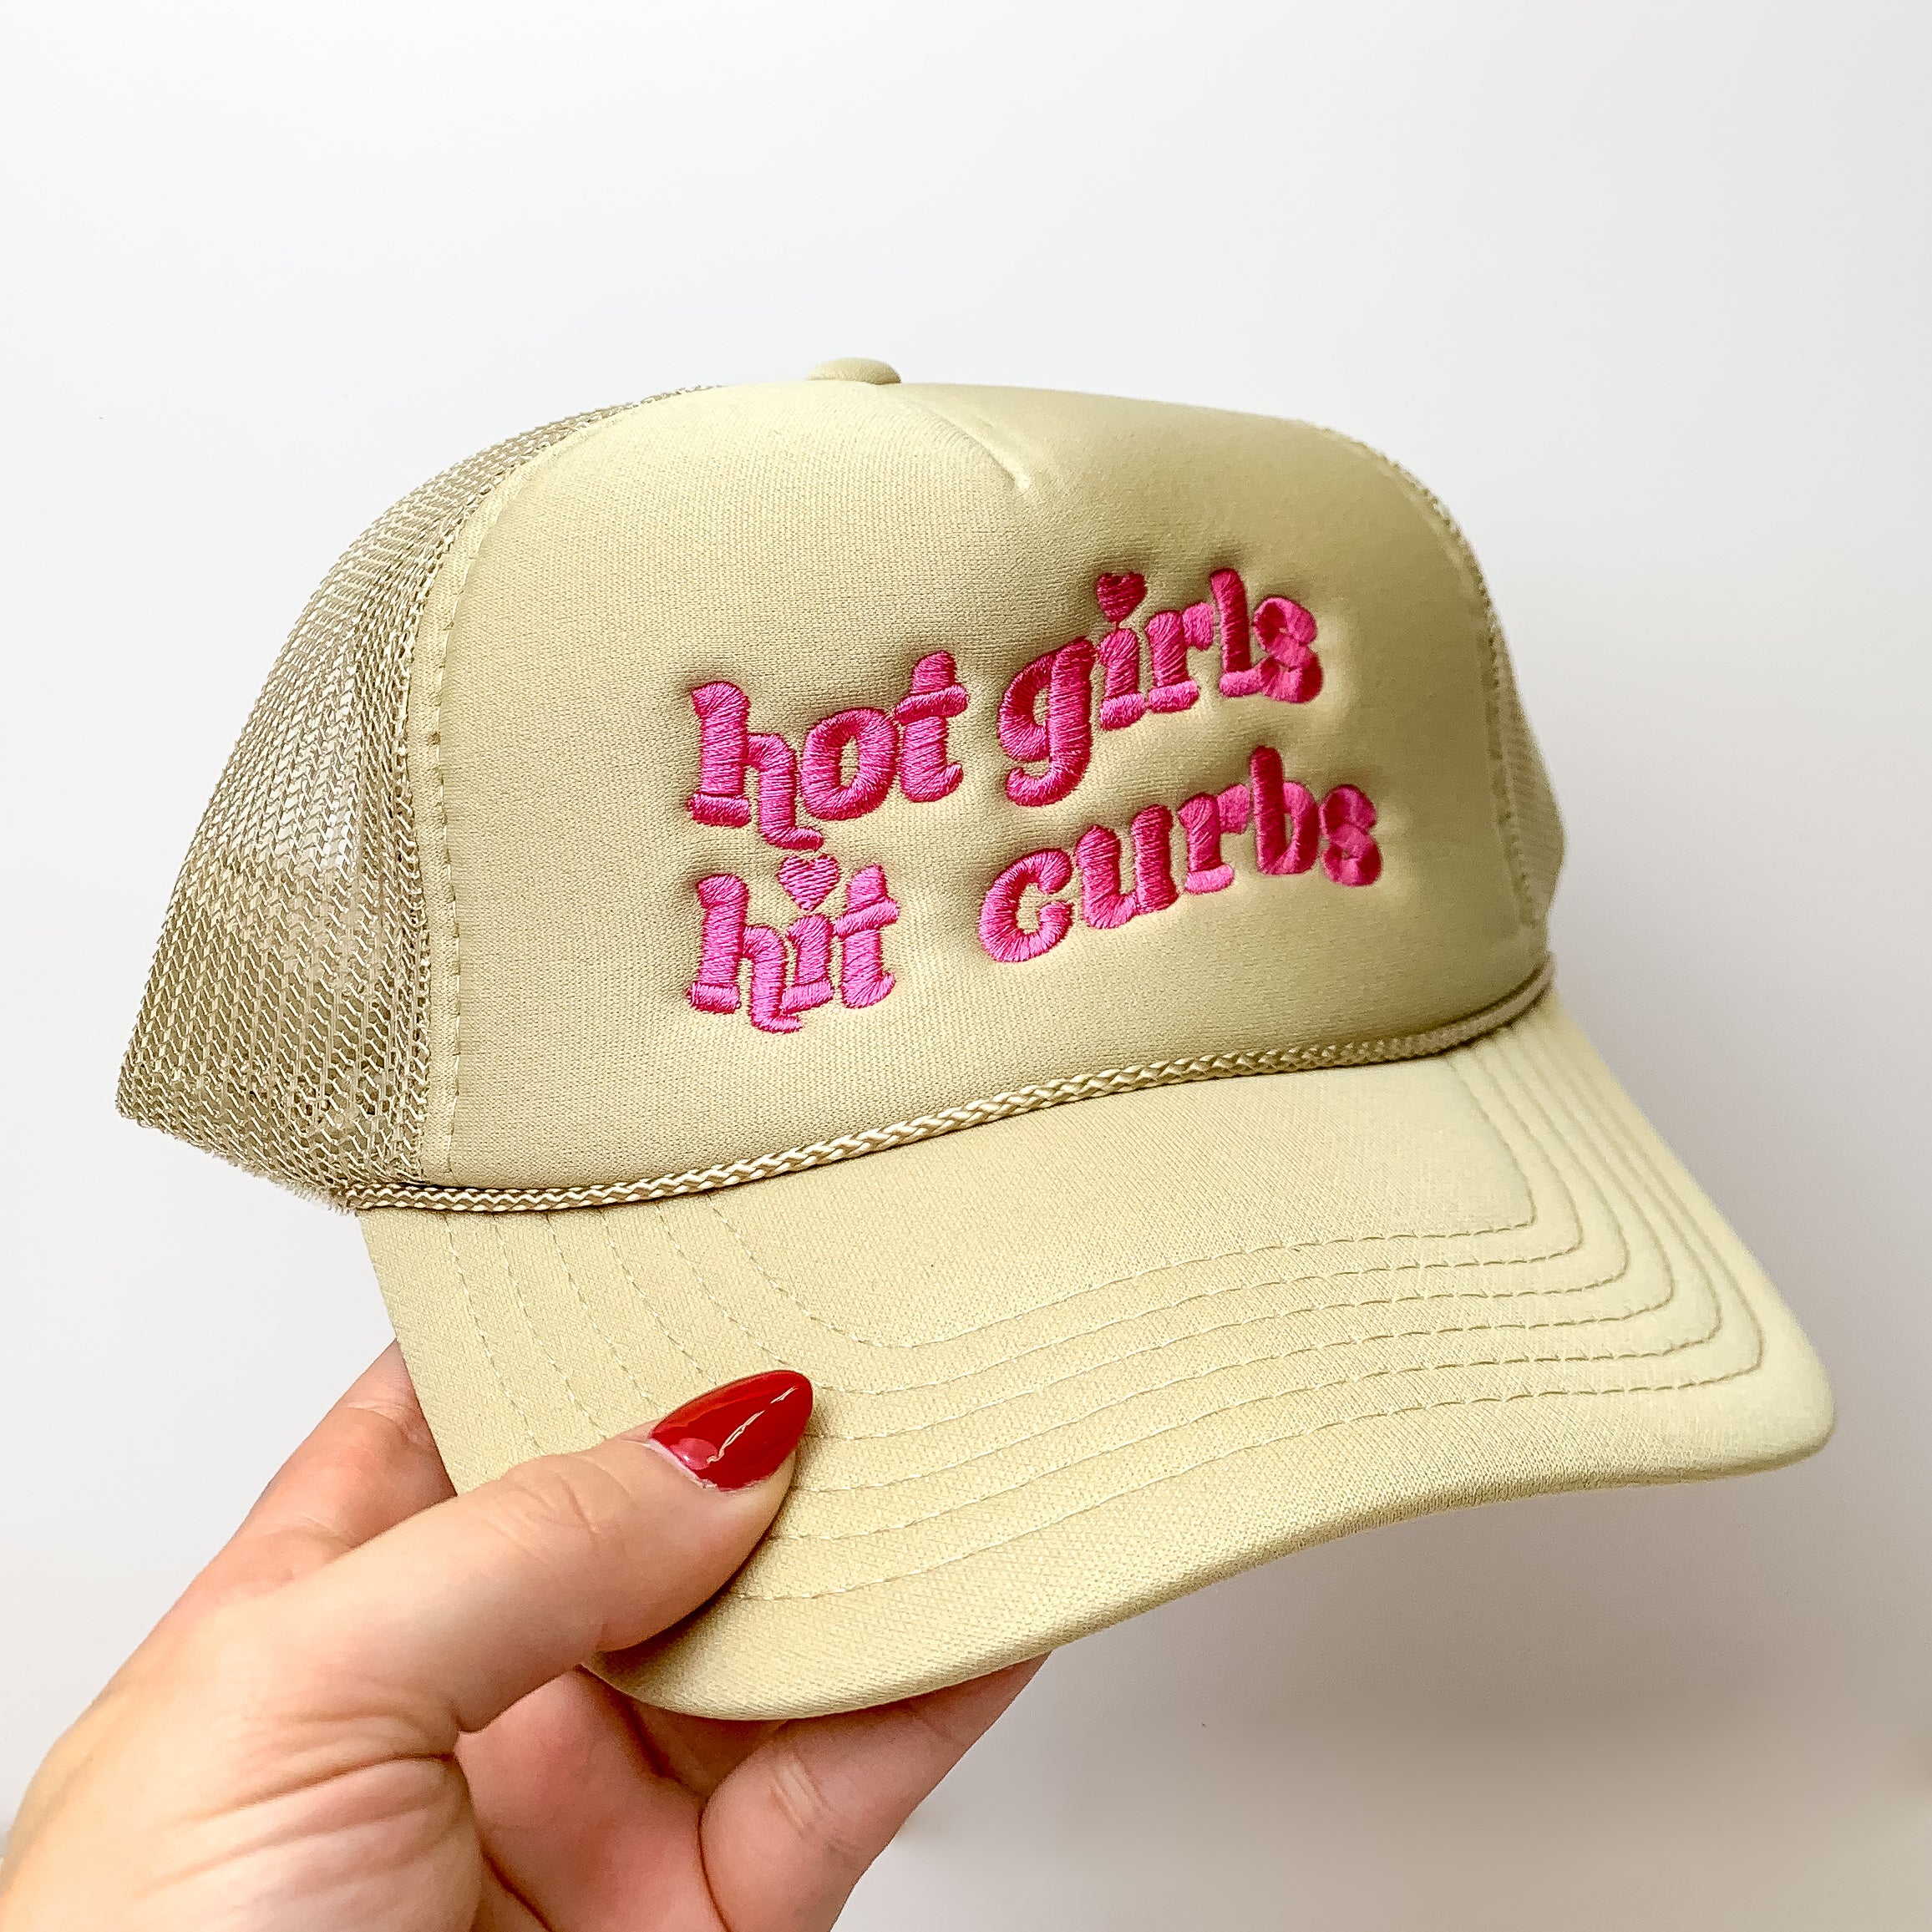 Hot Girls Hit Curbs Foam Trucker Hat in Pink and Cream - Giddy Up Glamour Boutique